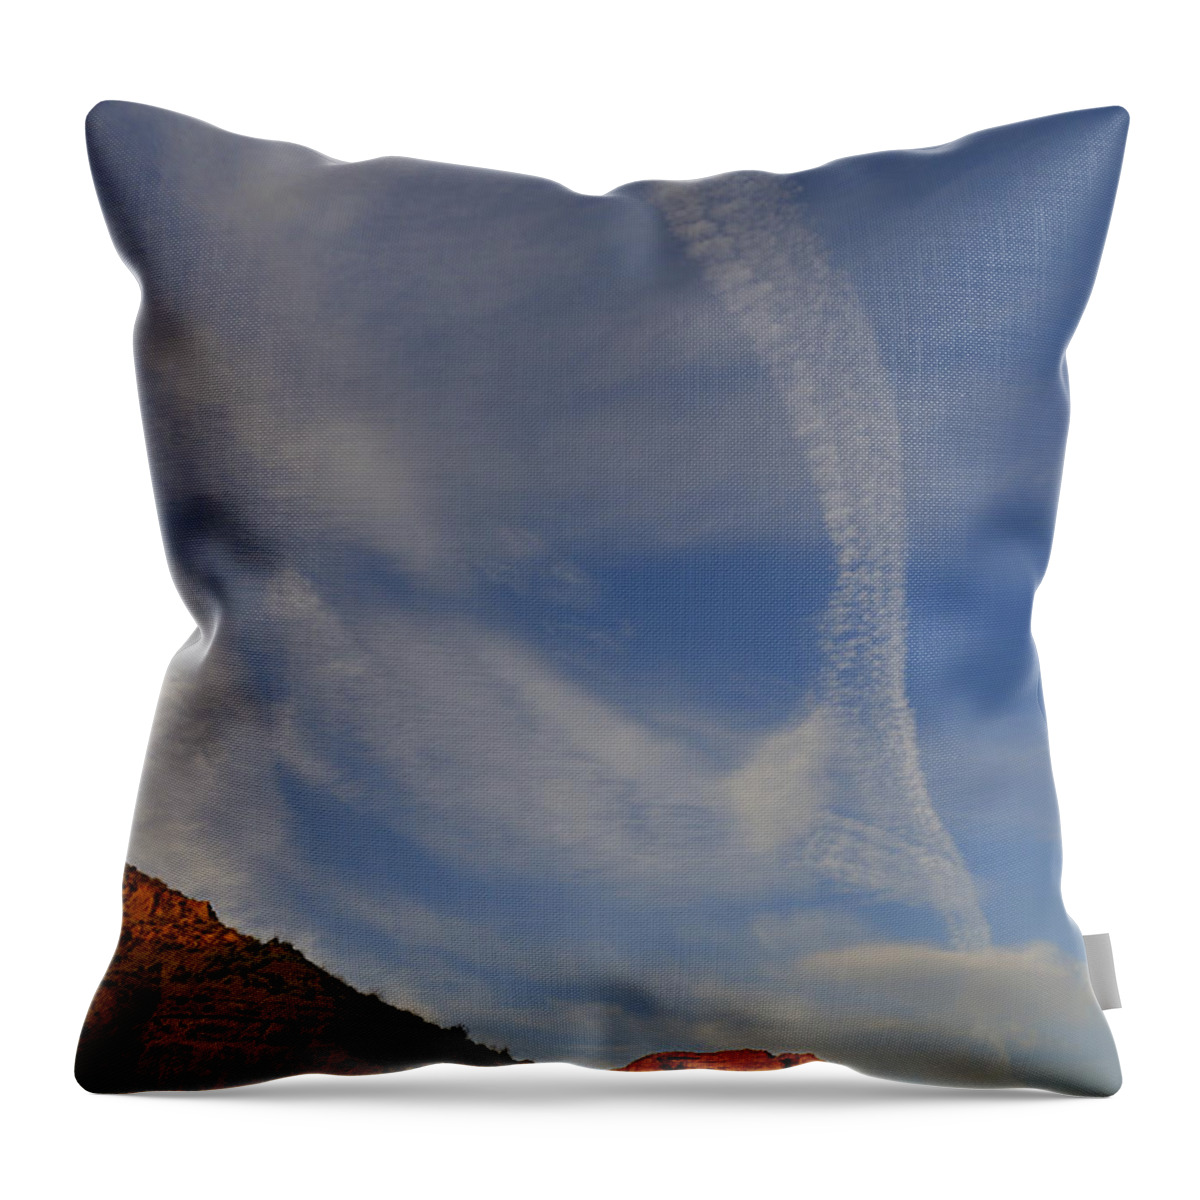 Outdoors Throw Pillow featuring the photograph Bad lands #8 by Guido Montanes Castillo